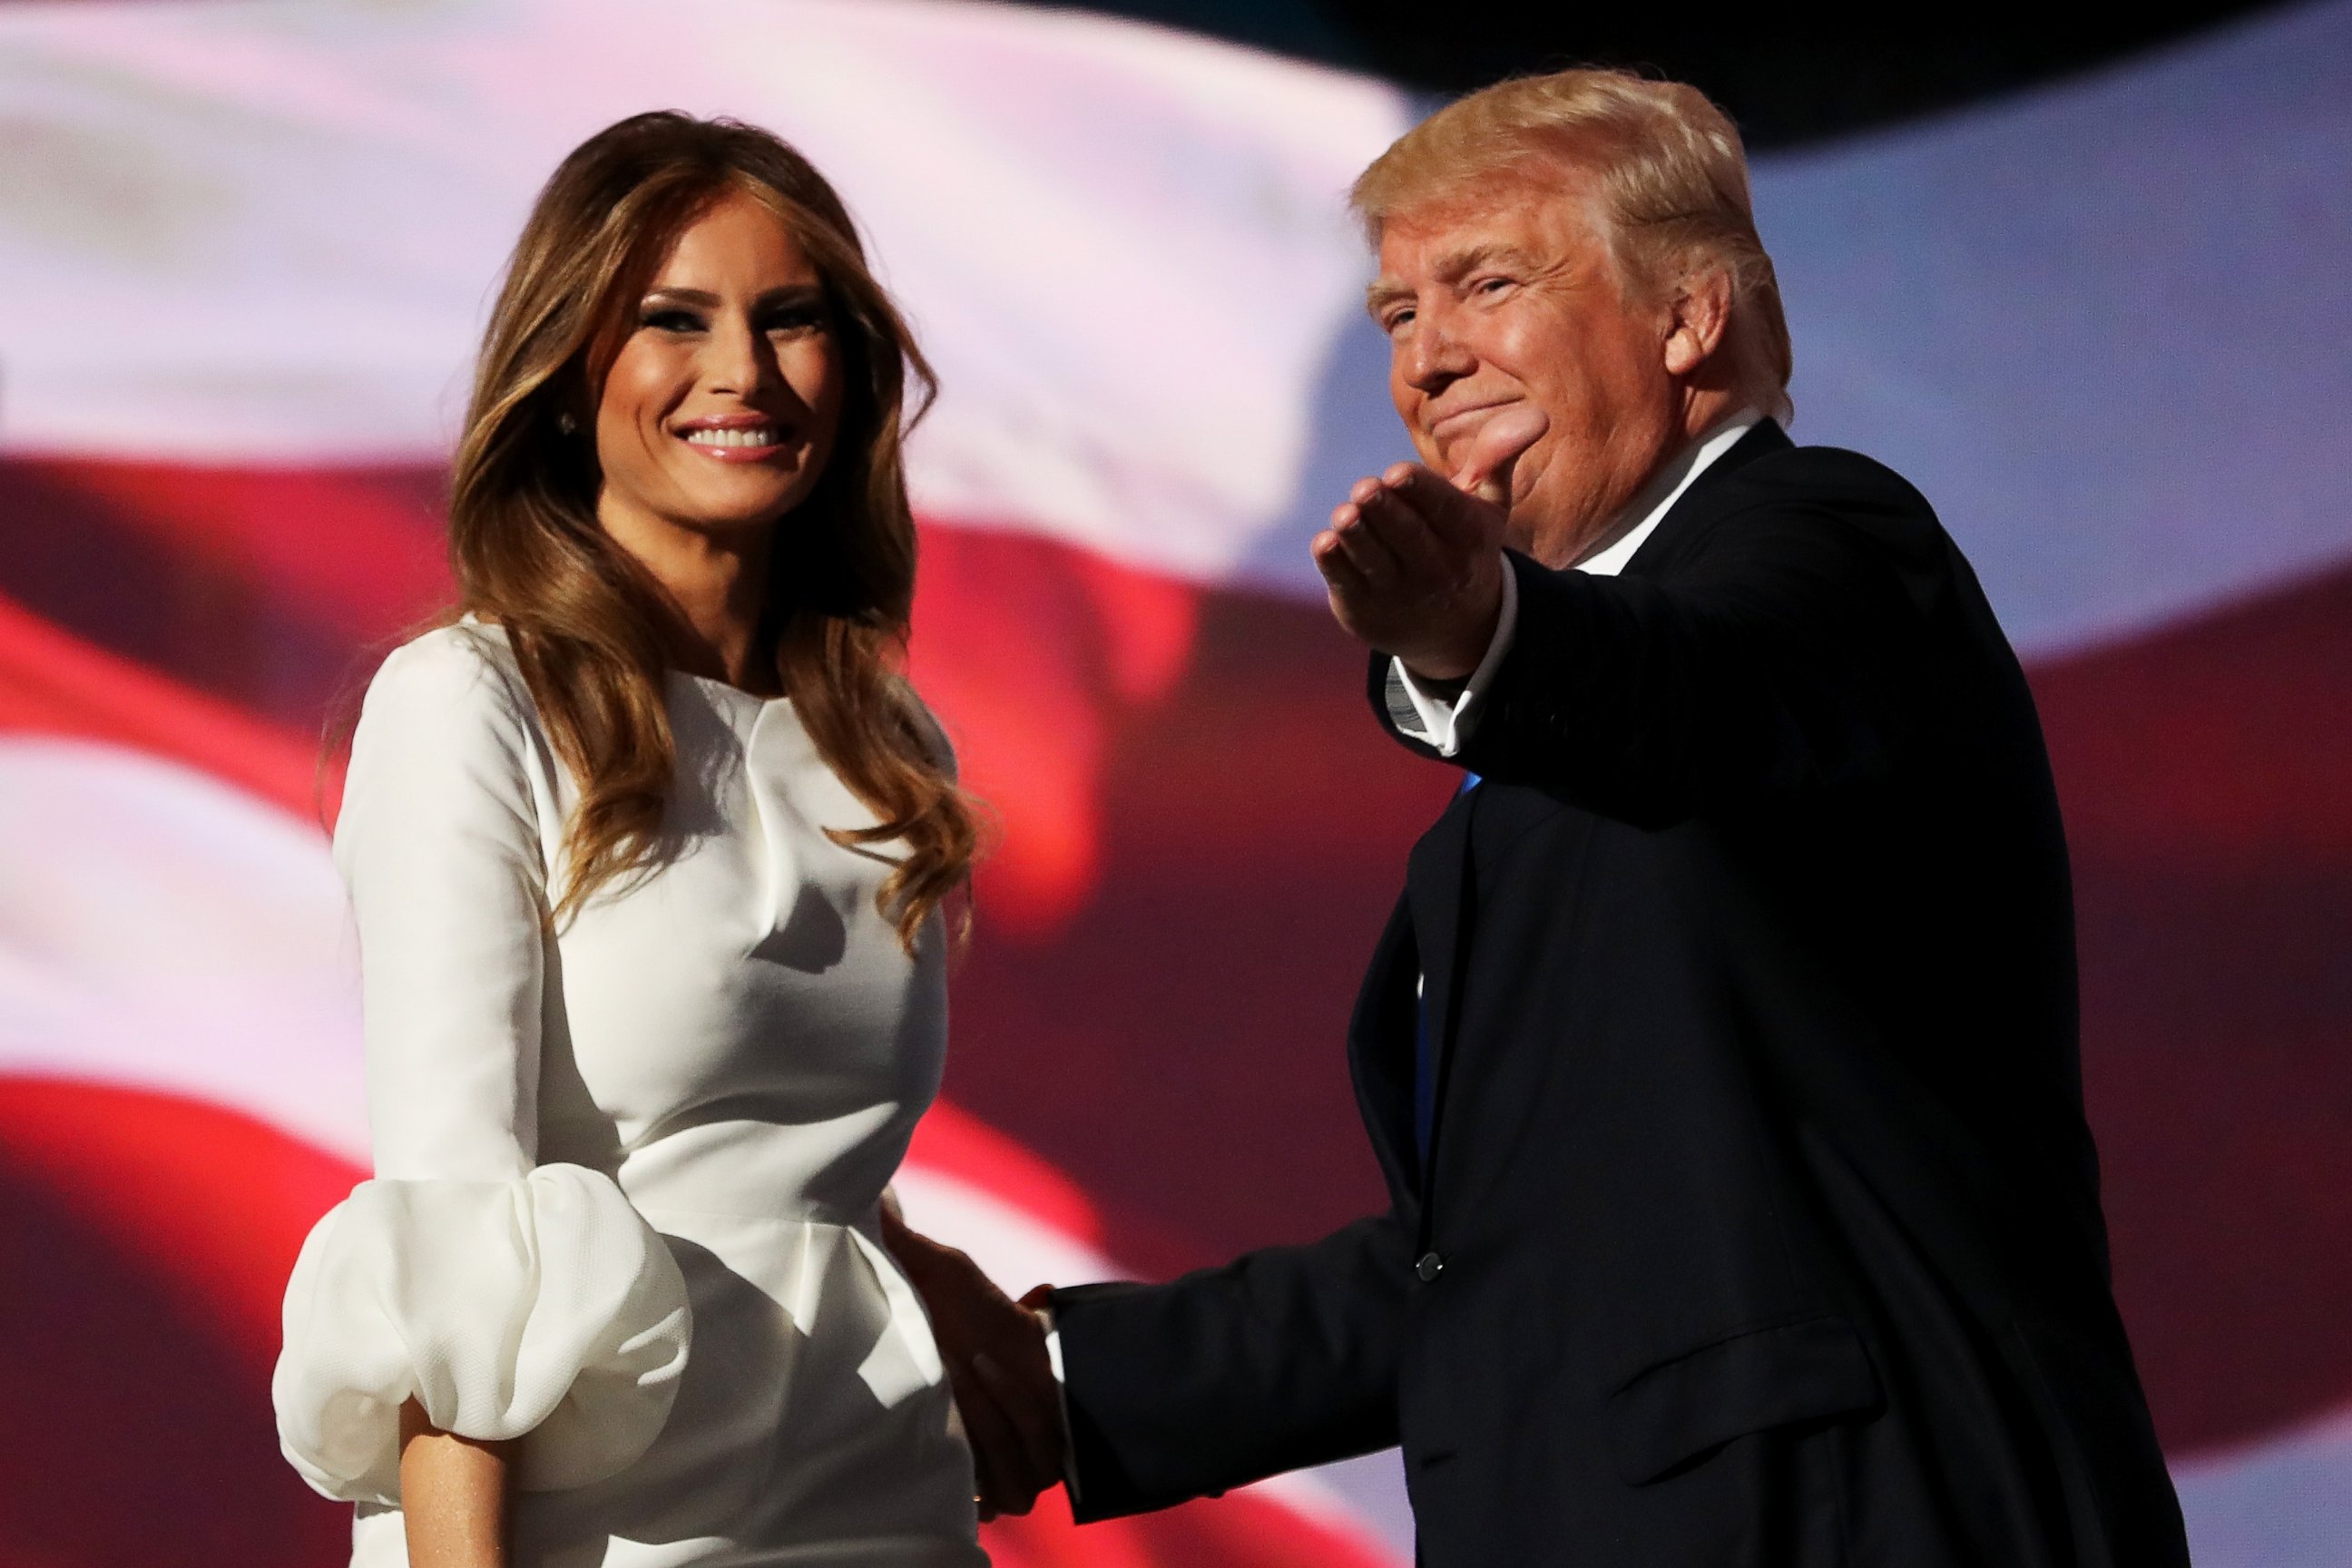 PHOTO: Presumptive Republican presidential nominee Donald Trump introduces his wife Melania on the first day of the Republican National Convention on July 18, 2016, at the Quicken Loans Arena in Cleveland, Ohio.